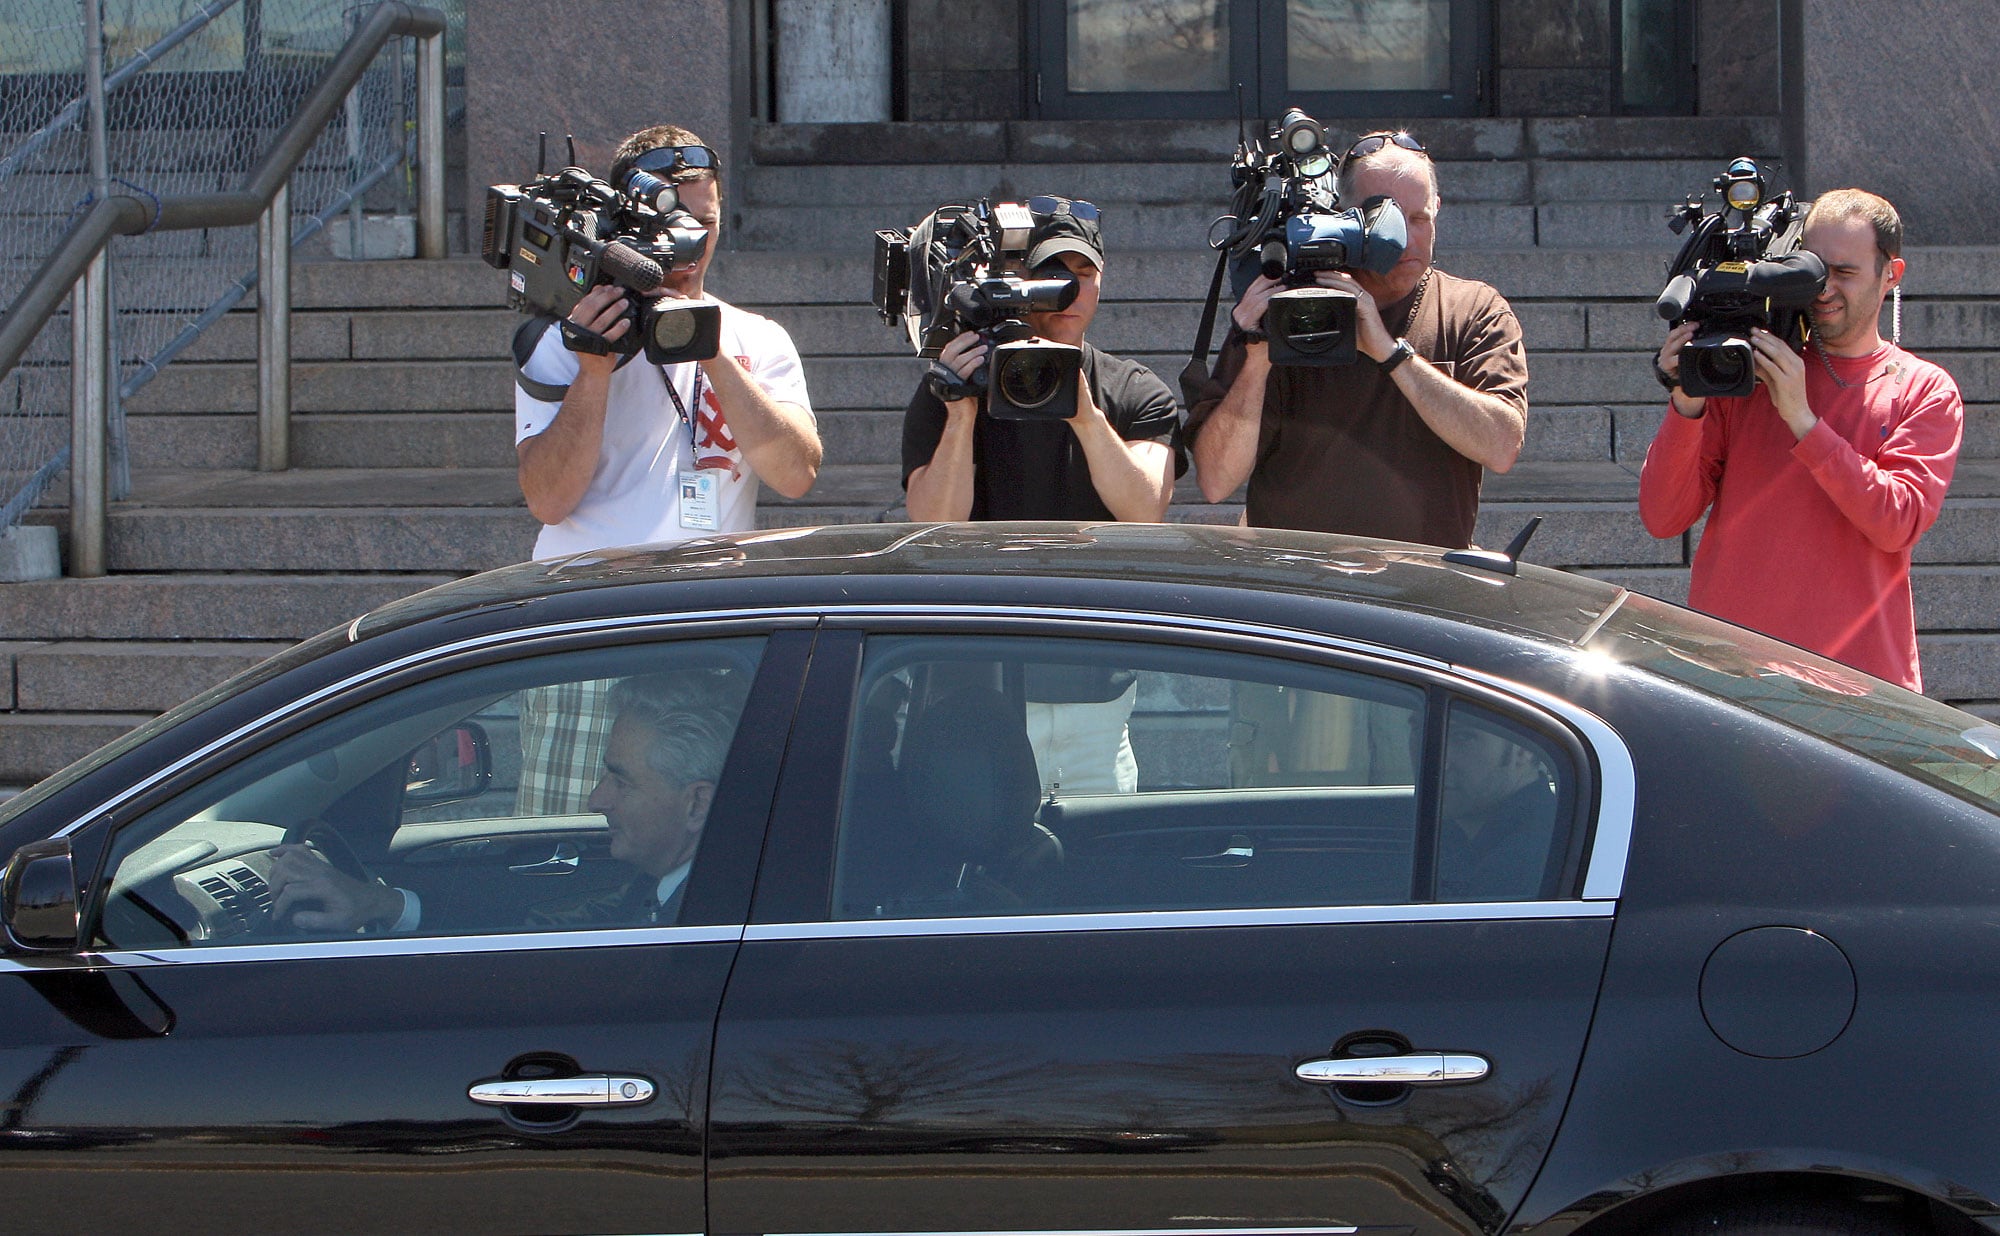 The media follows Philip’s brother as he drives his car.